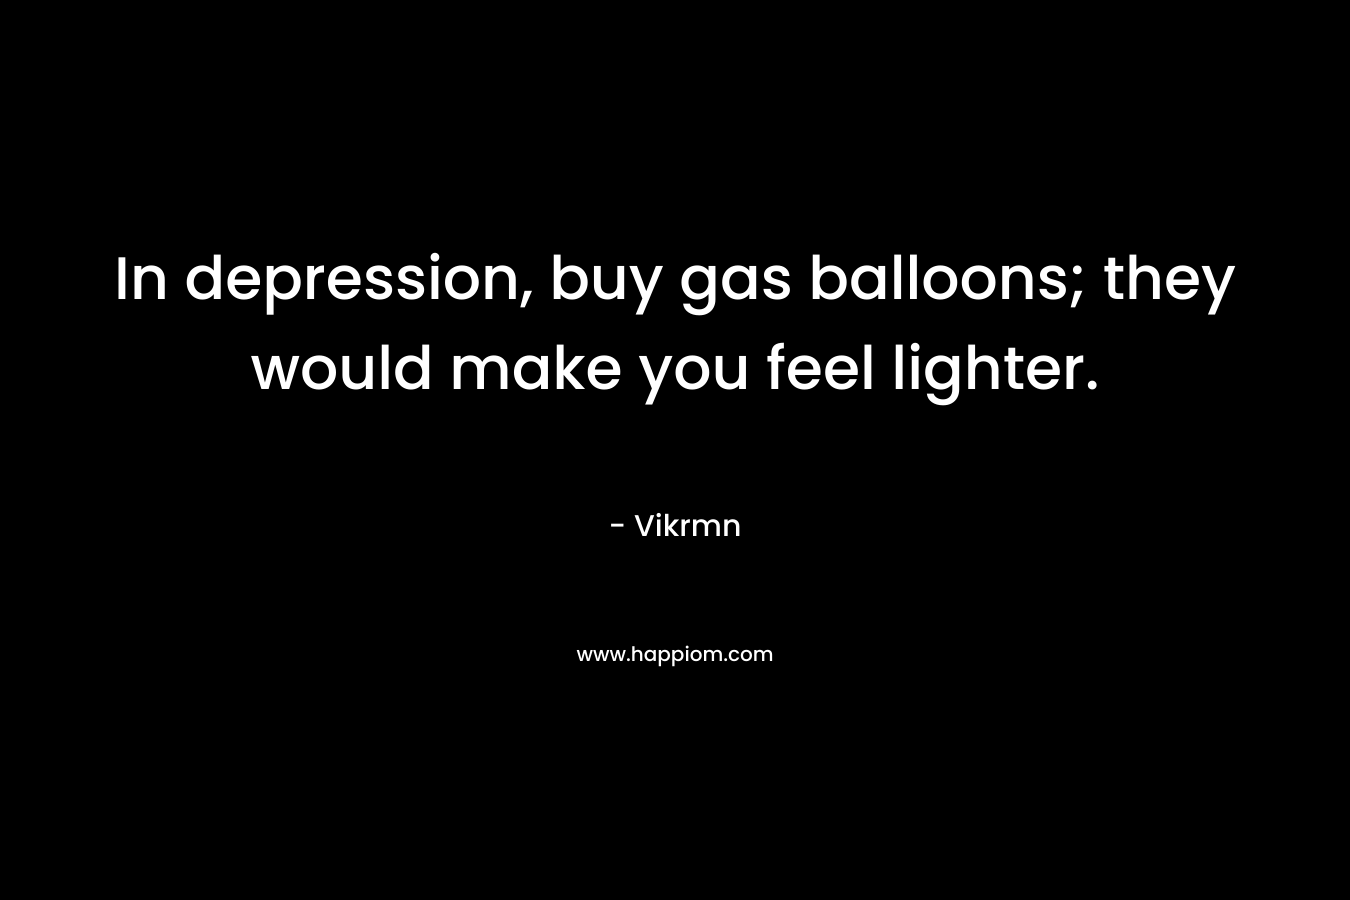 In depression, buy gas balloons; they would make you feel lighter.